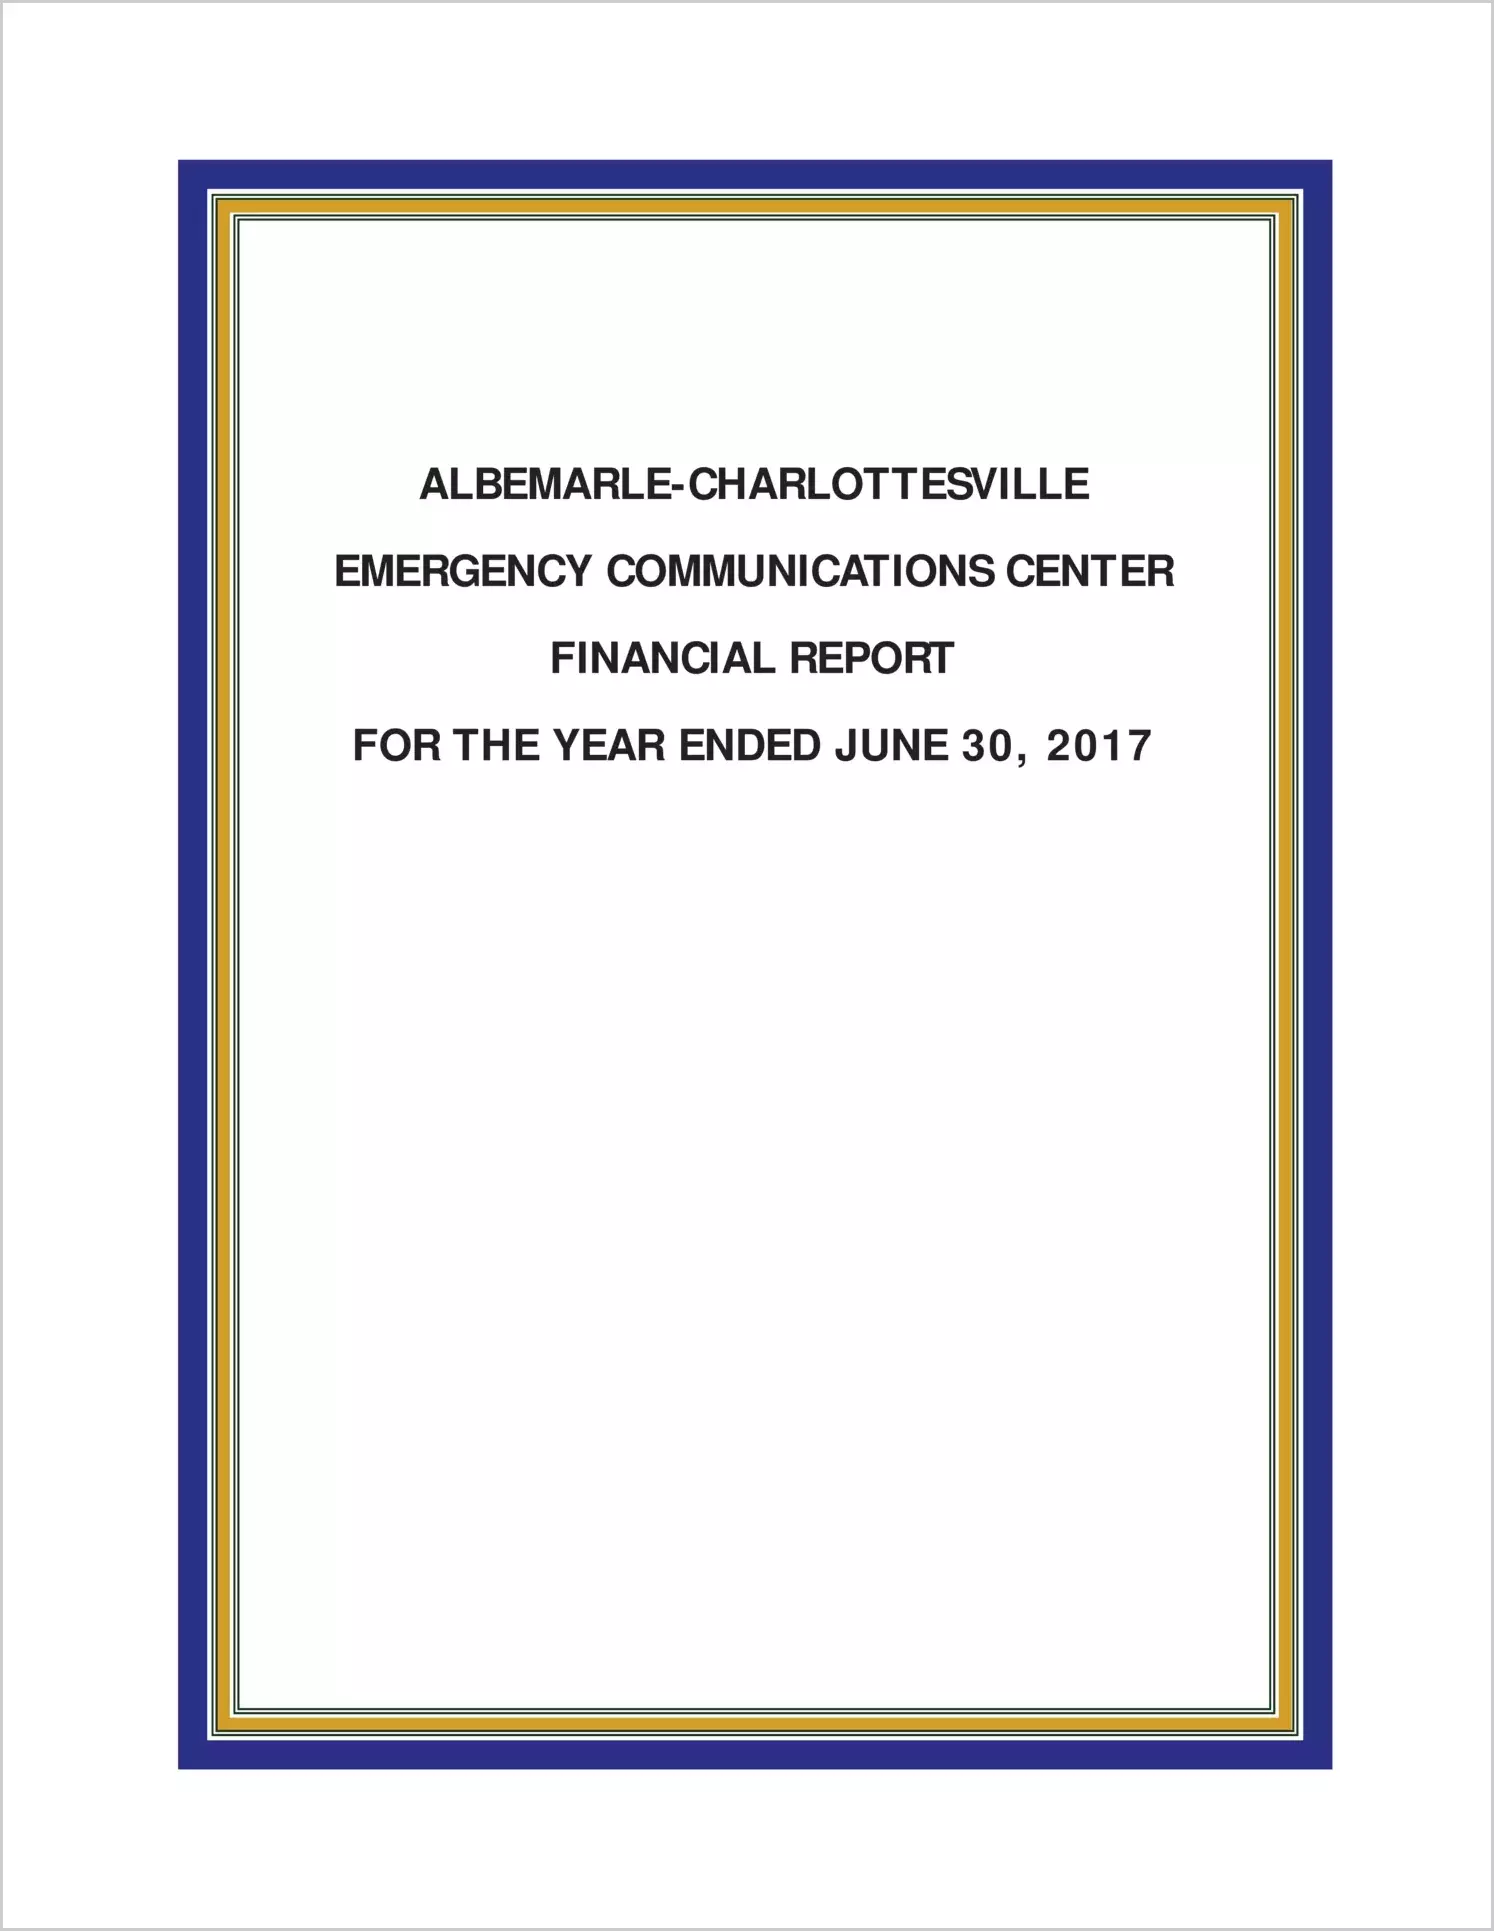 2017 ABC/Other Annual Financial Report  for Albemarle-Charlottesville Emergency Communications Center